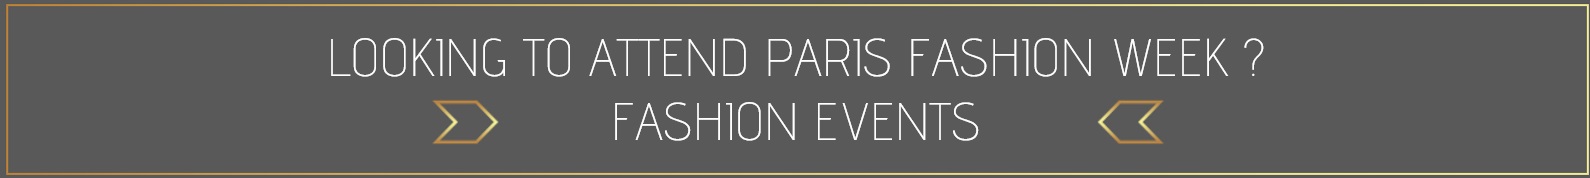 looking for tickets for paris fashion week - the sincura styled team can help you